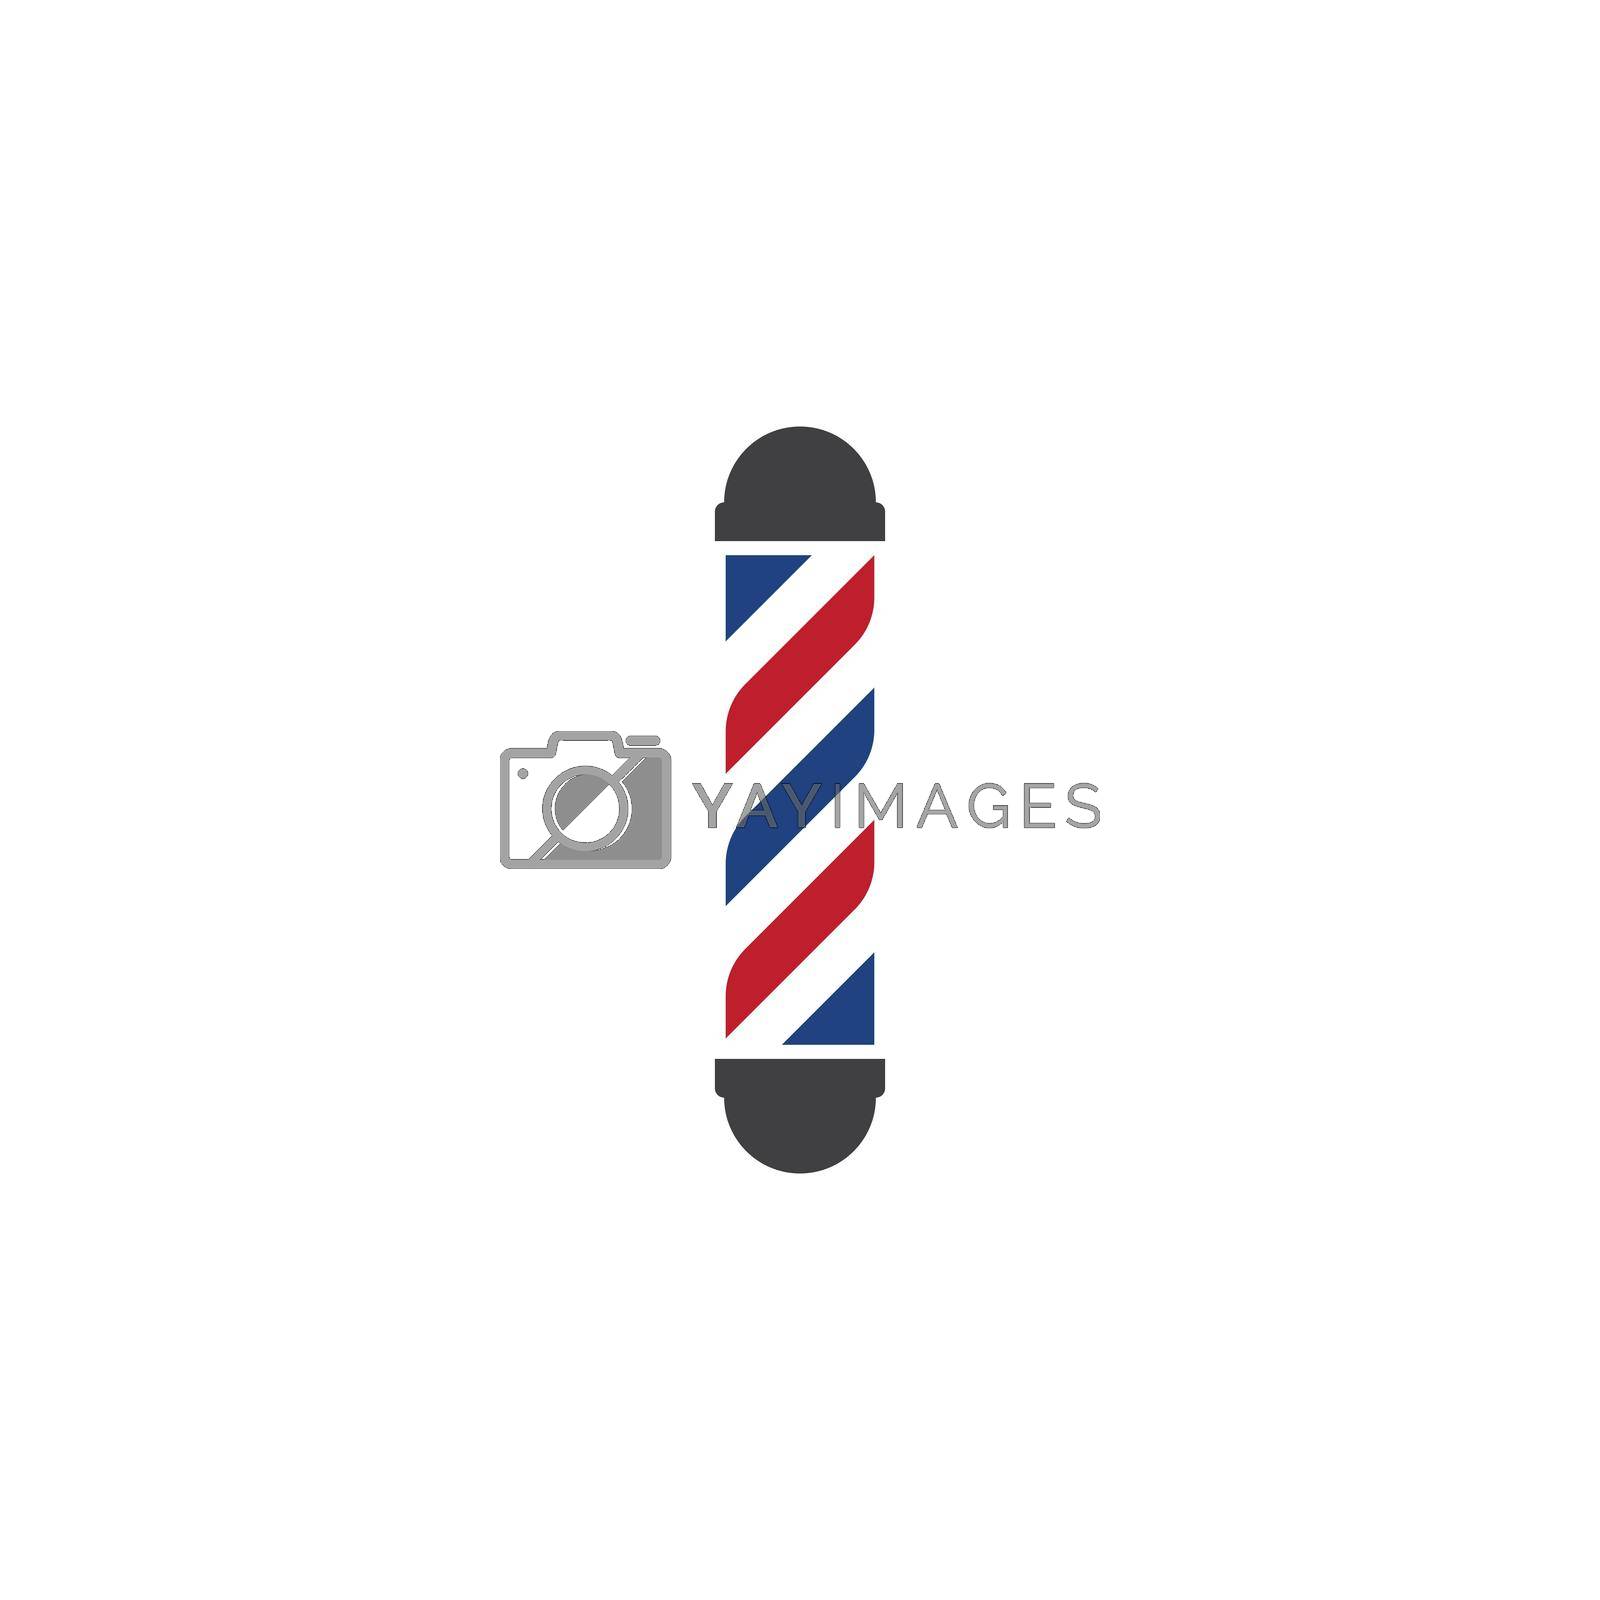 Royalty free image of Barber pole logo by awk